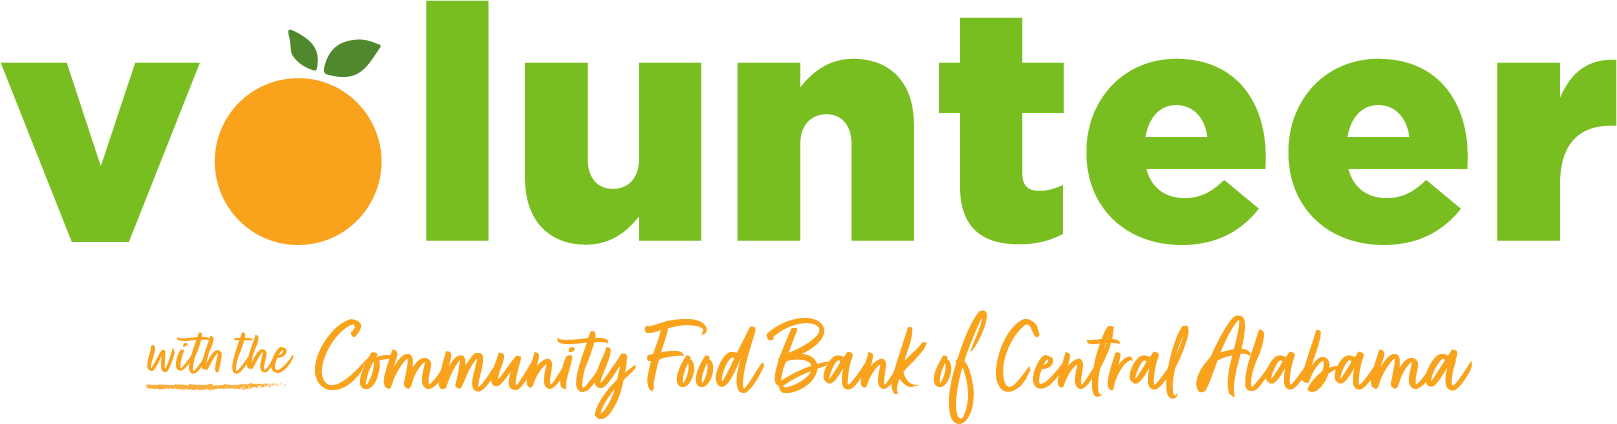 Volunteer with the Community Food Bank of Central Alabama